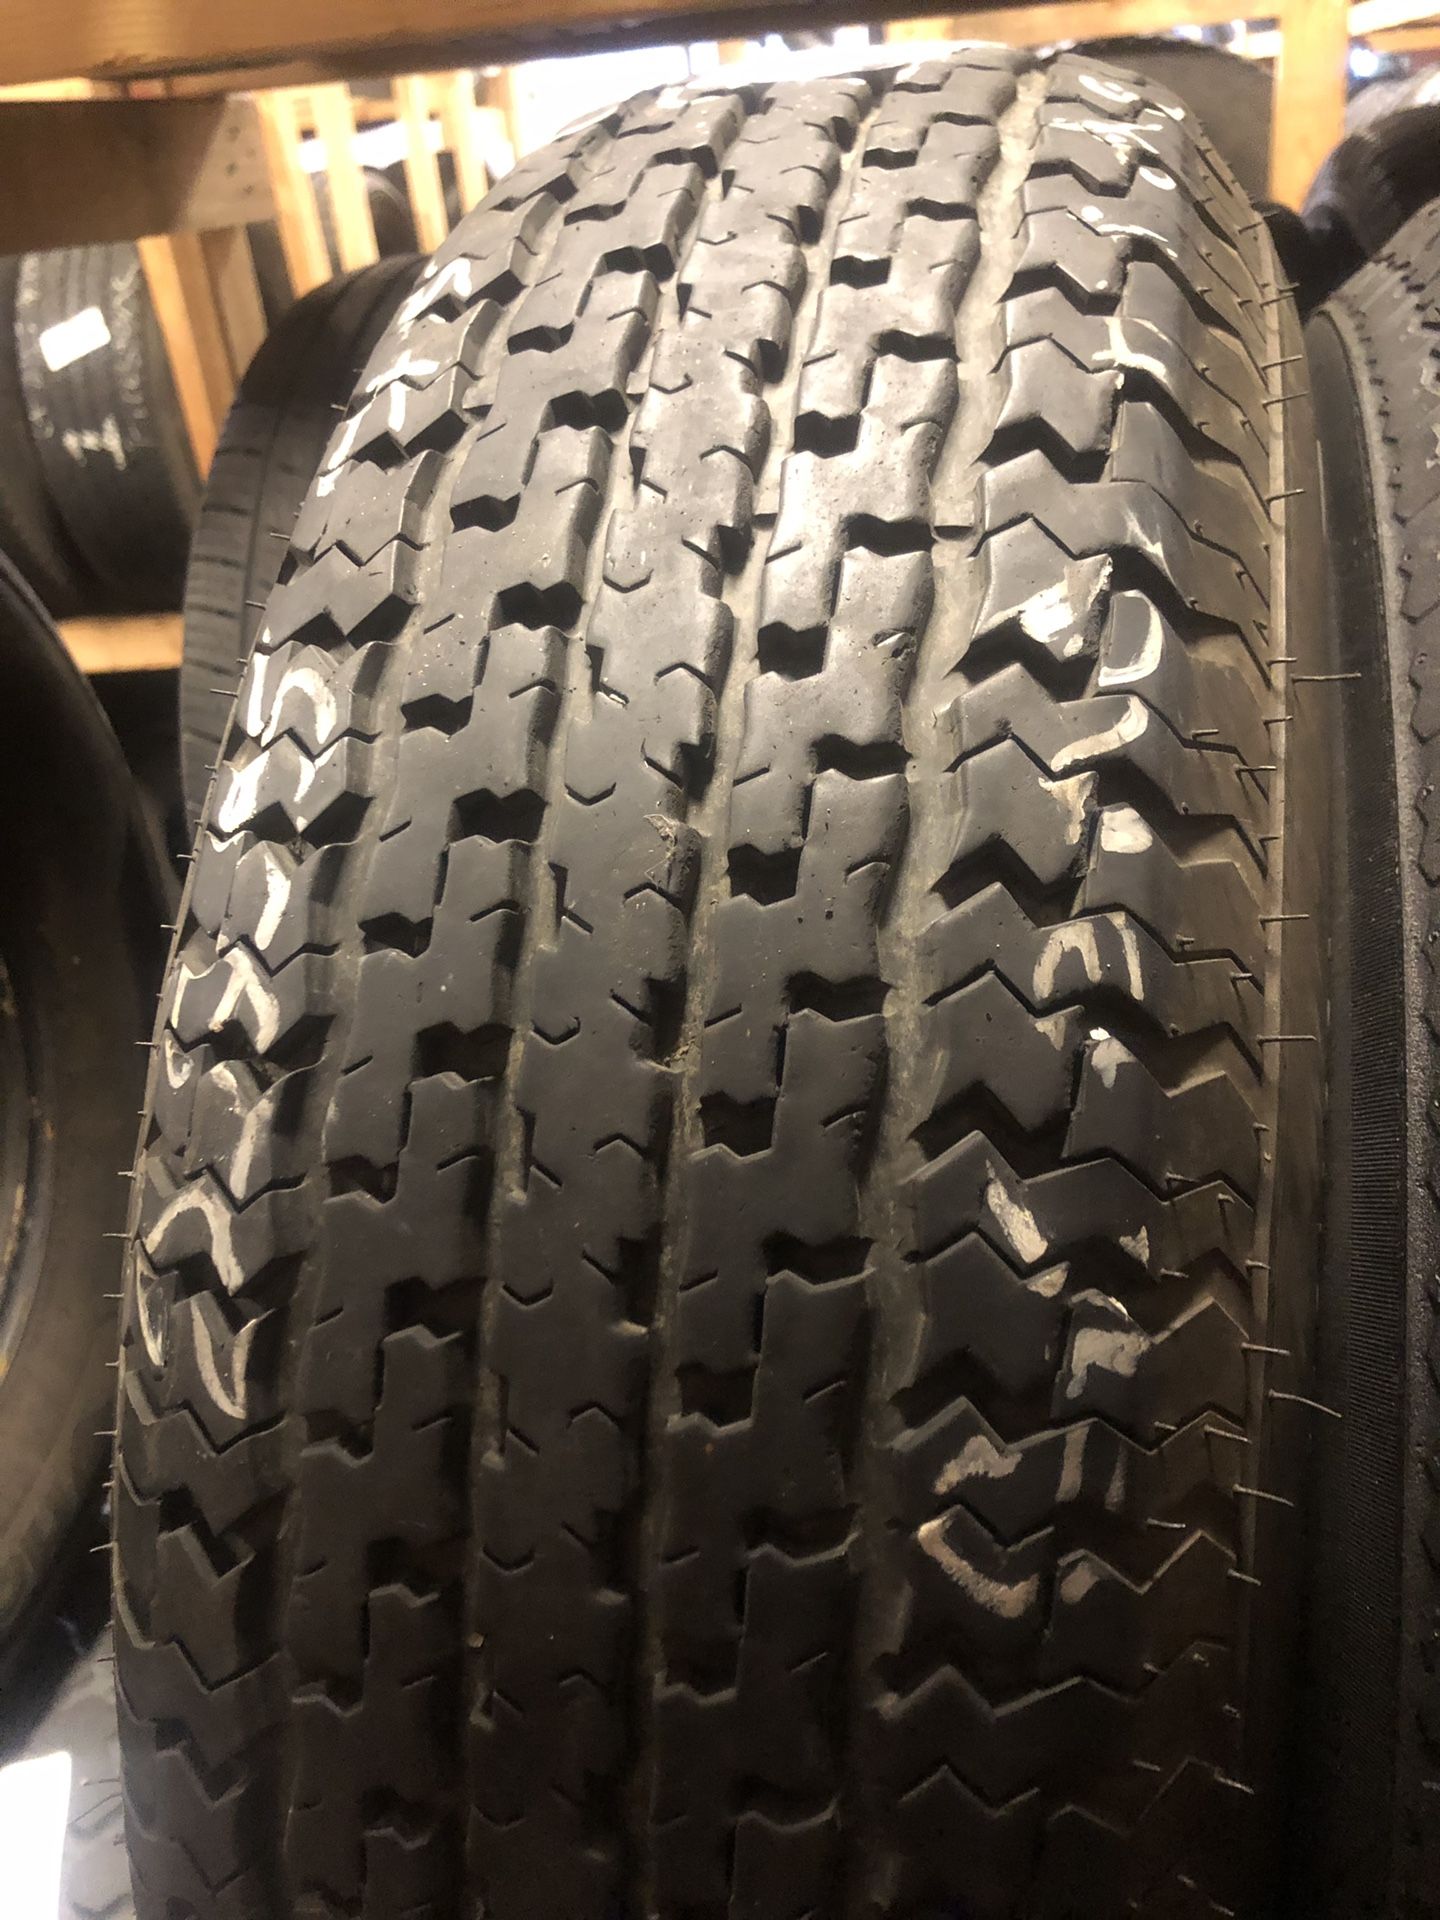 Single (1) ST 225 75 15 trailer tire for only $38 with FREE INSTALL!!!